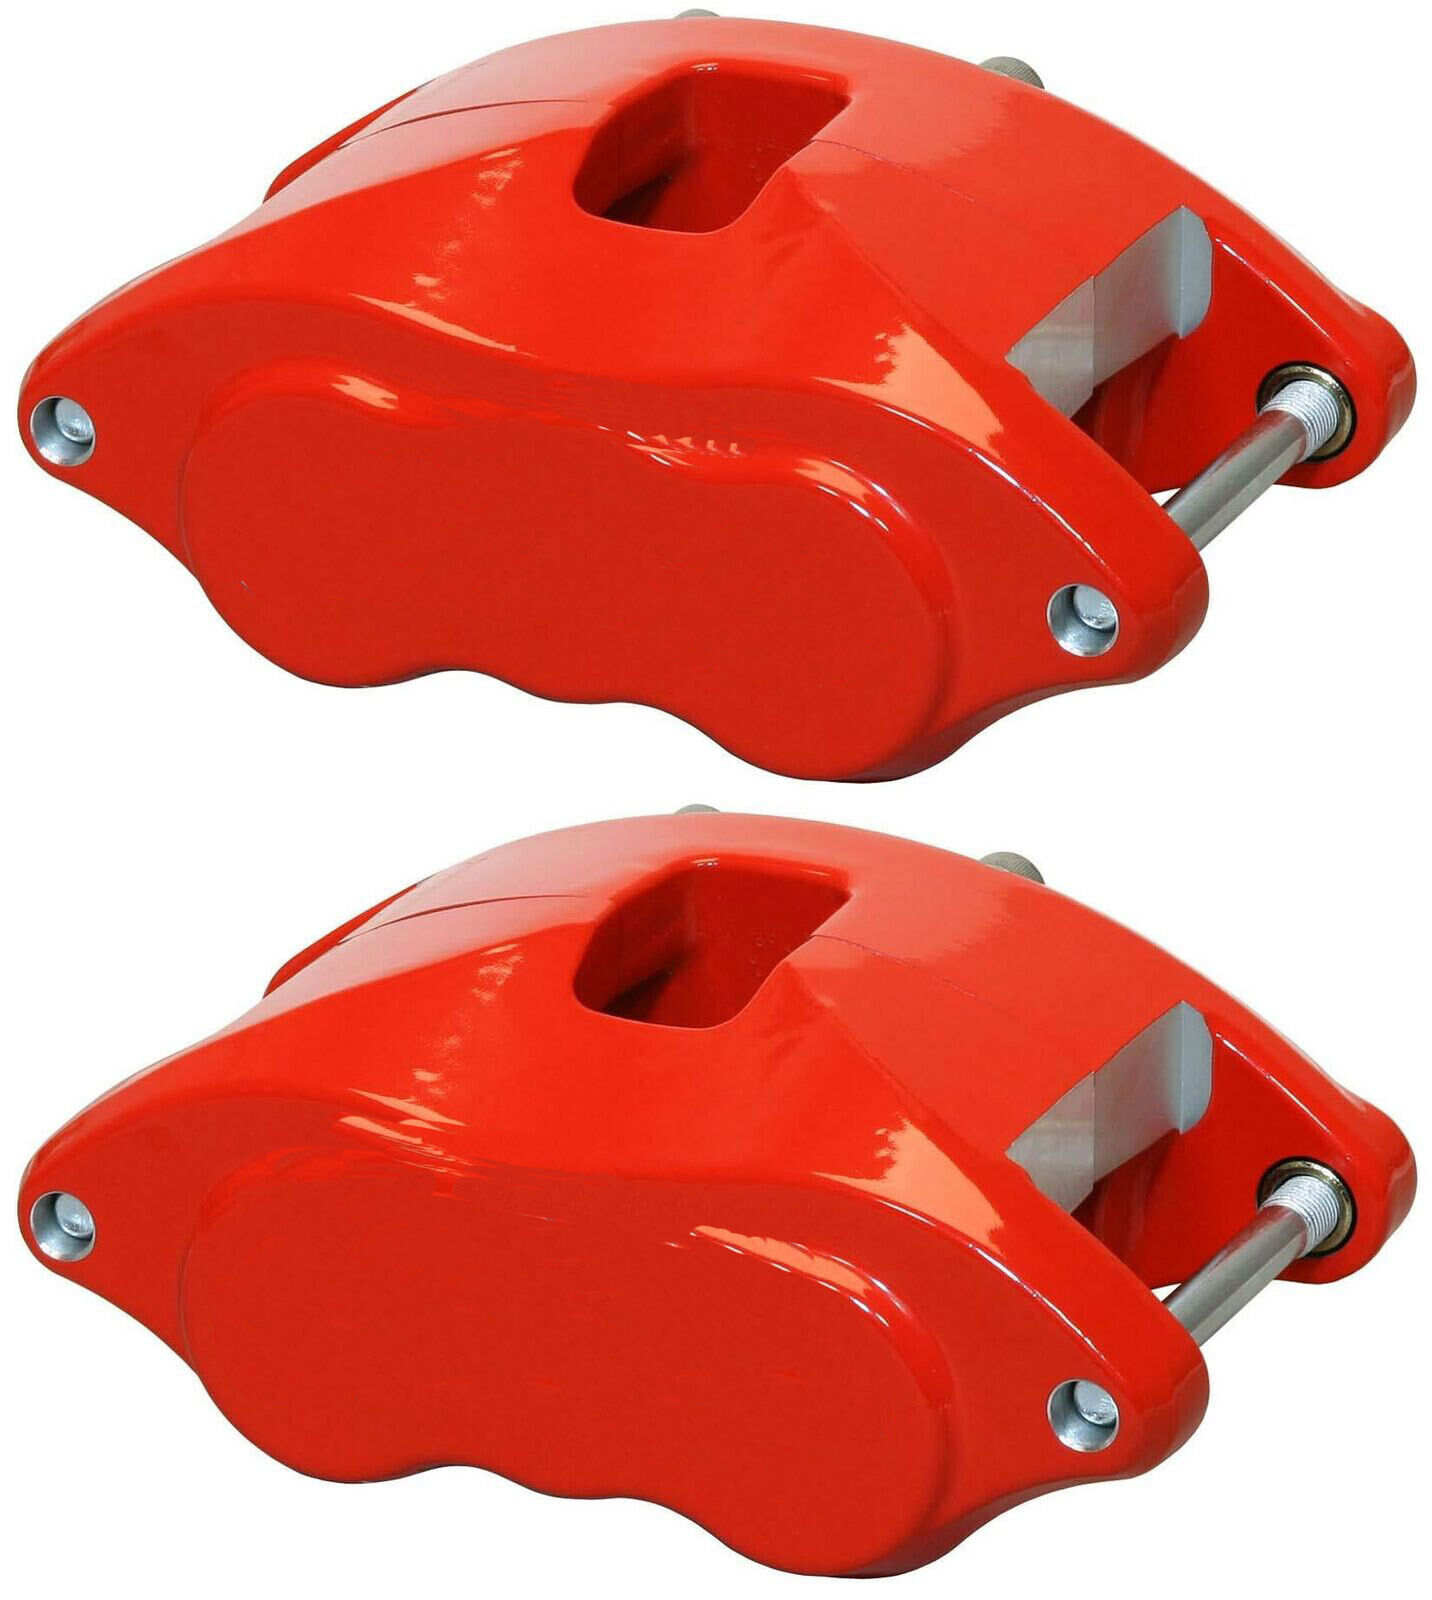 GM Muscle car 2 pistons forged aluminum red calipers & pads